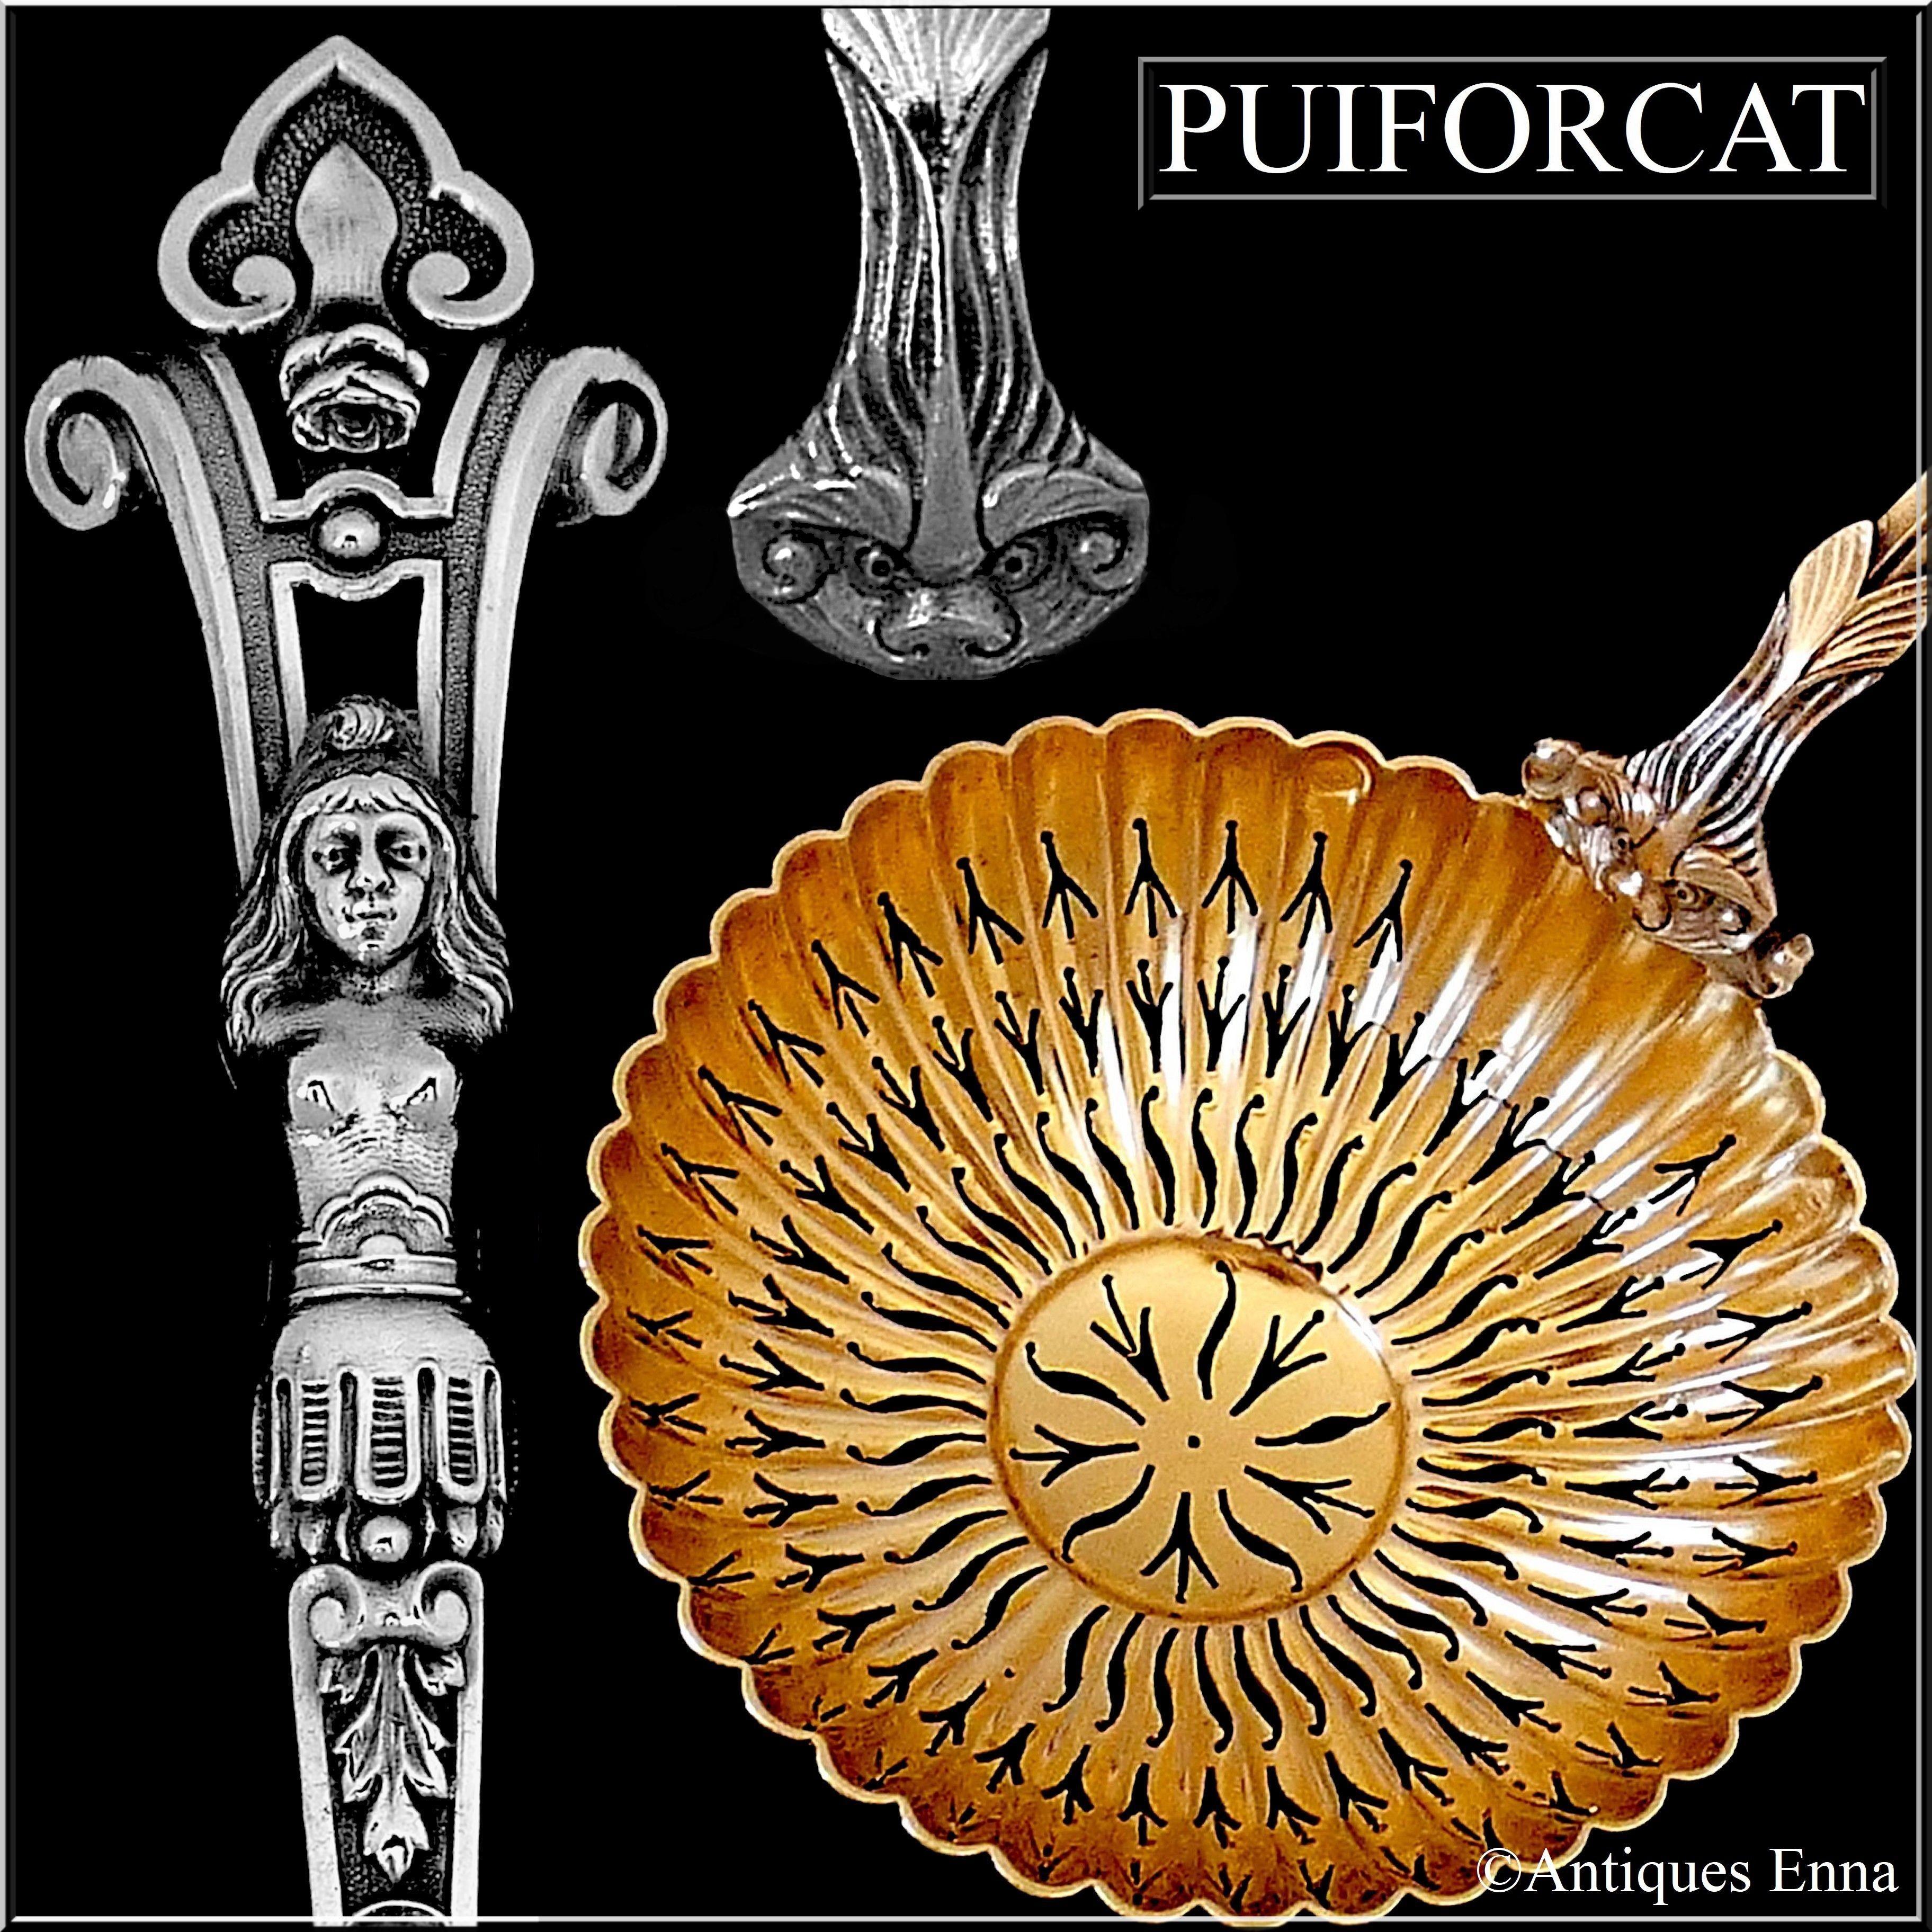 Head of Minerve 1st titre for 950/1000 French sterling silver guarantee. The quality of the gold used to recover sterling silver is a minimum of 750 mils (18-karat).

An exceptional piece from the point of view of its design by Puiforcat with